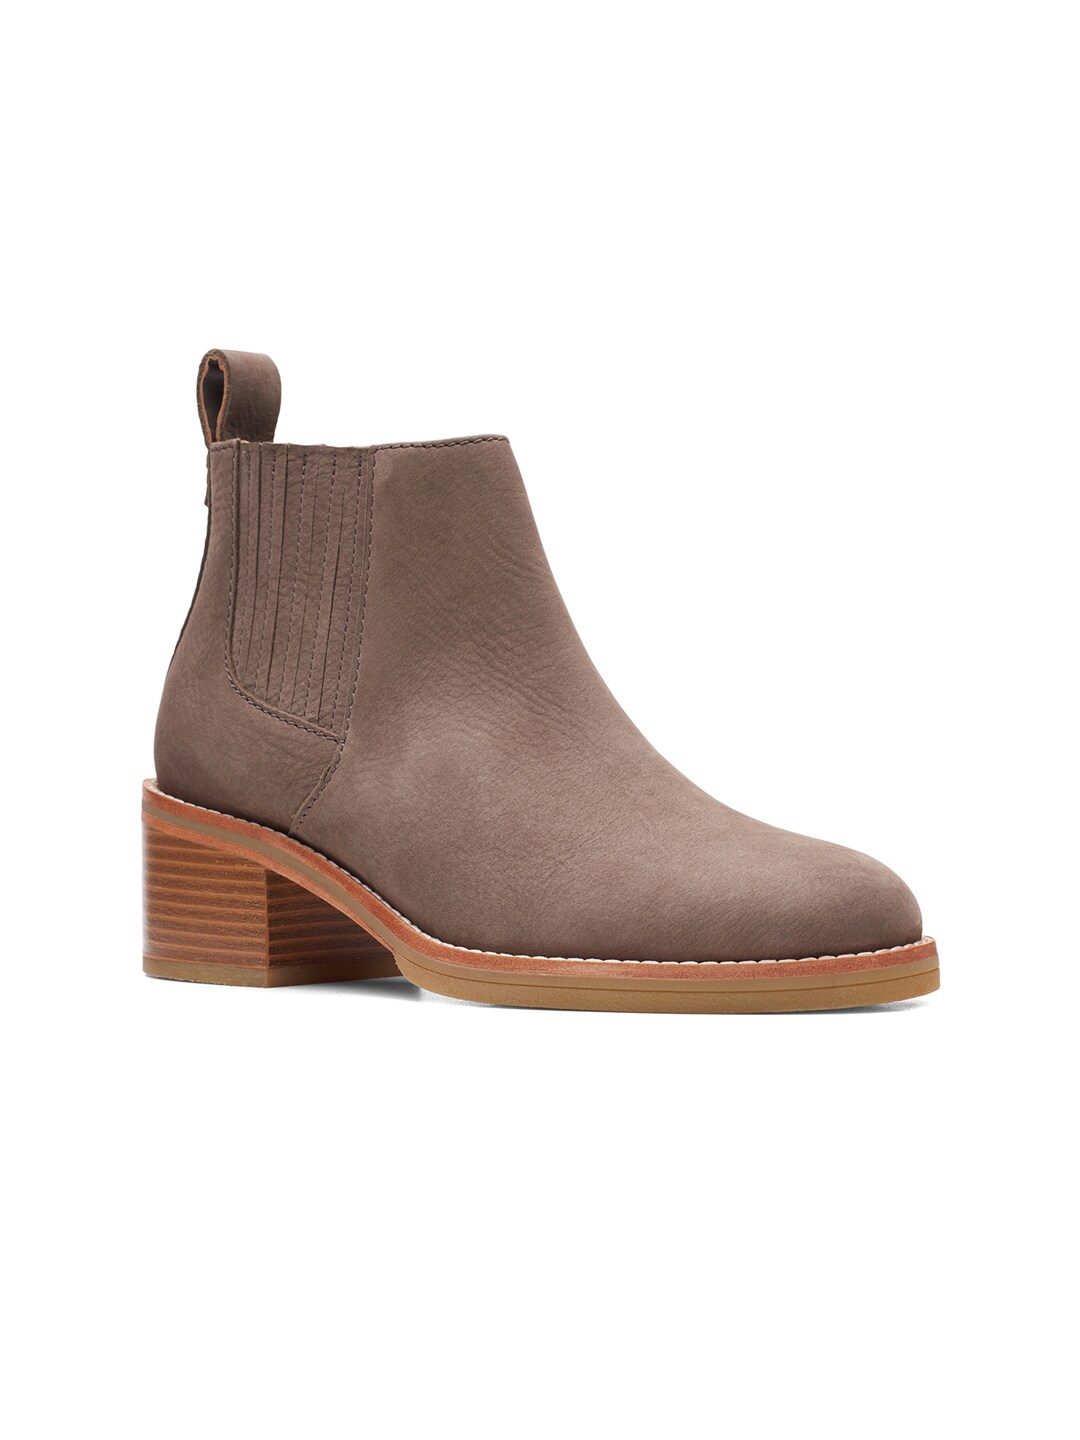 Clarks Taupe Suede Block Heeled Boots Price in India